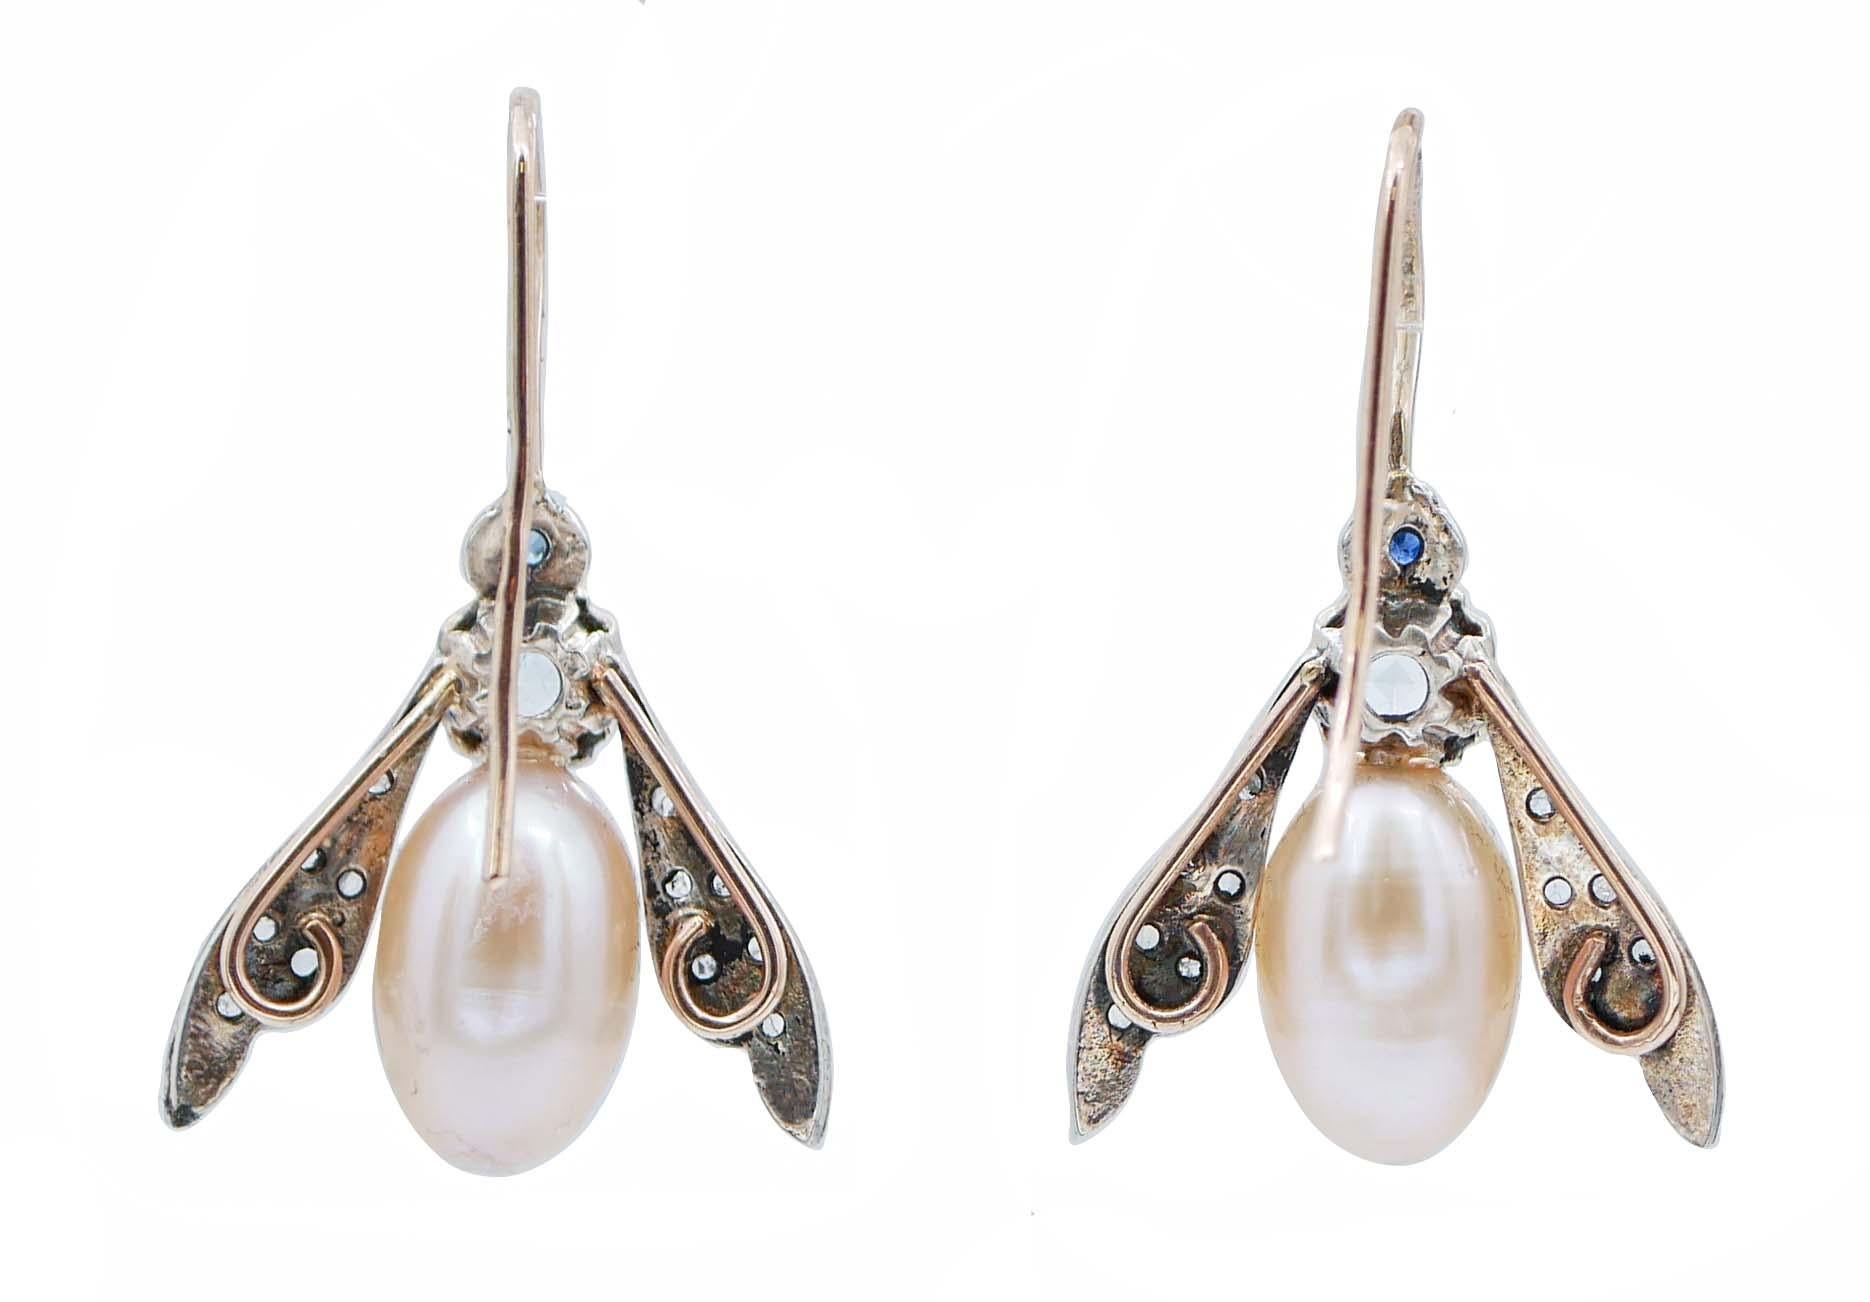 Retro Topazs, Sapphires, Pearls, Diamonds, Rose Gold and Silver Fly Shape Earrings For Sale